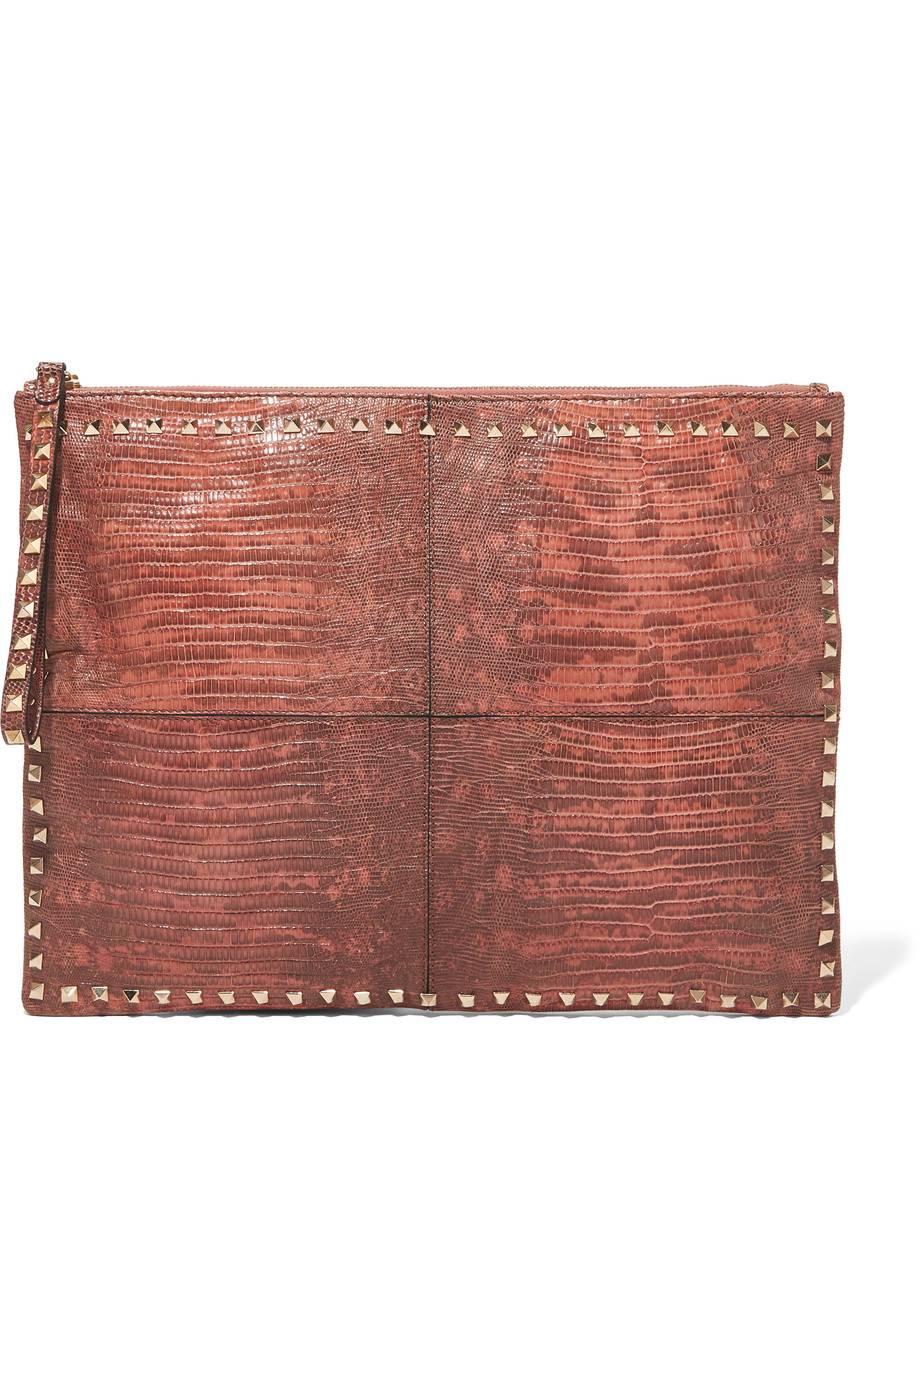 CURATOR'S NOTES

Valentino NEW & SOLD OUT Lizard Leather Envelope Fold Over Evening Clutch Bag 

Lizard leather
Gold tone hardware
Zipper closure
Linen interior
Made in Italy
Strap drop 6.5"
Measures 15.5" W x 12" H x 1" D 
